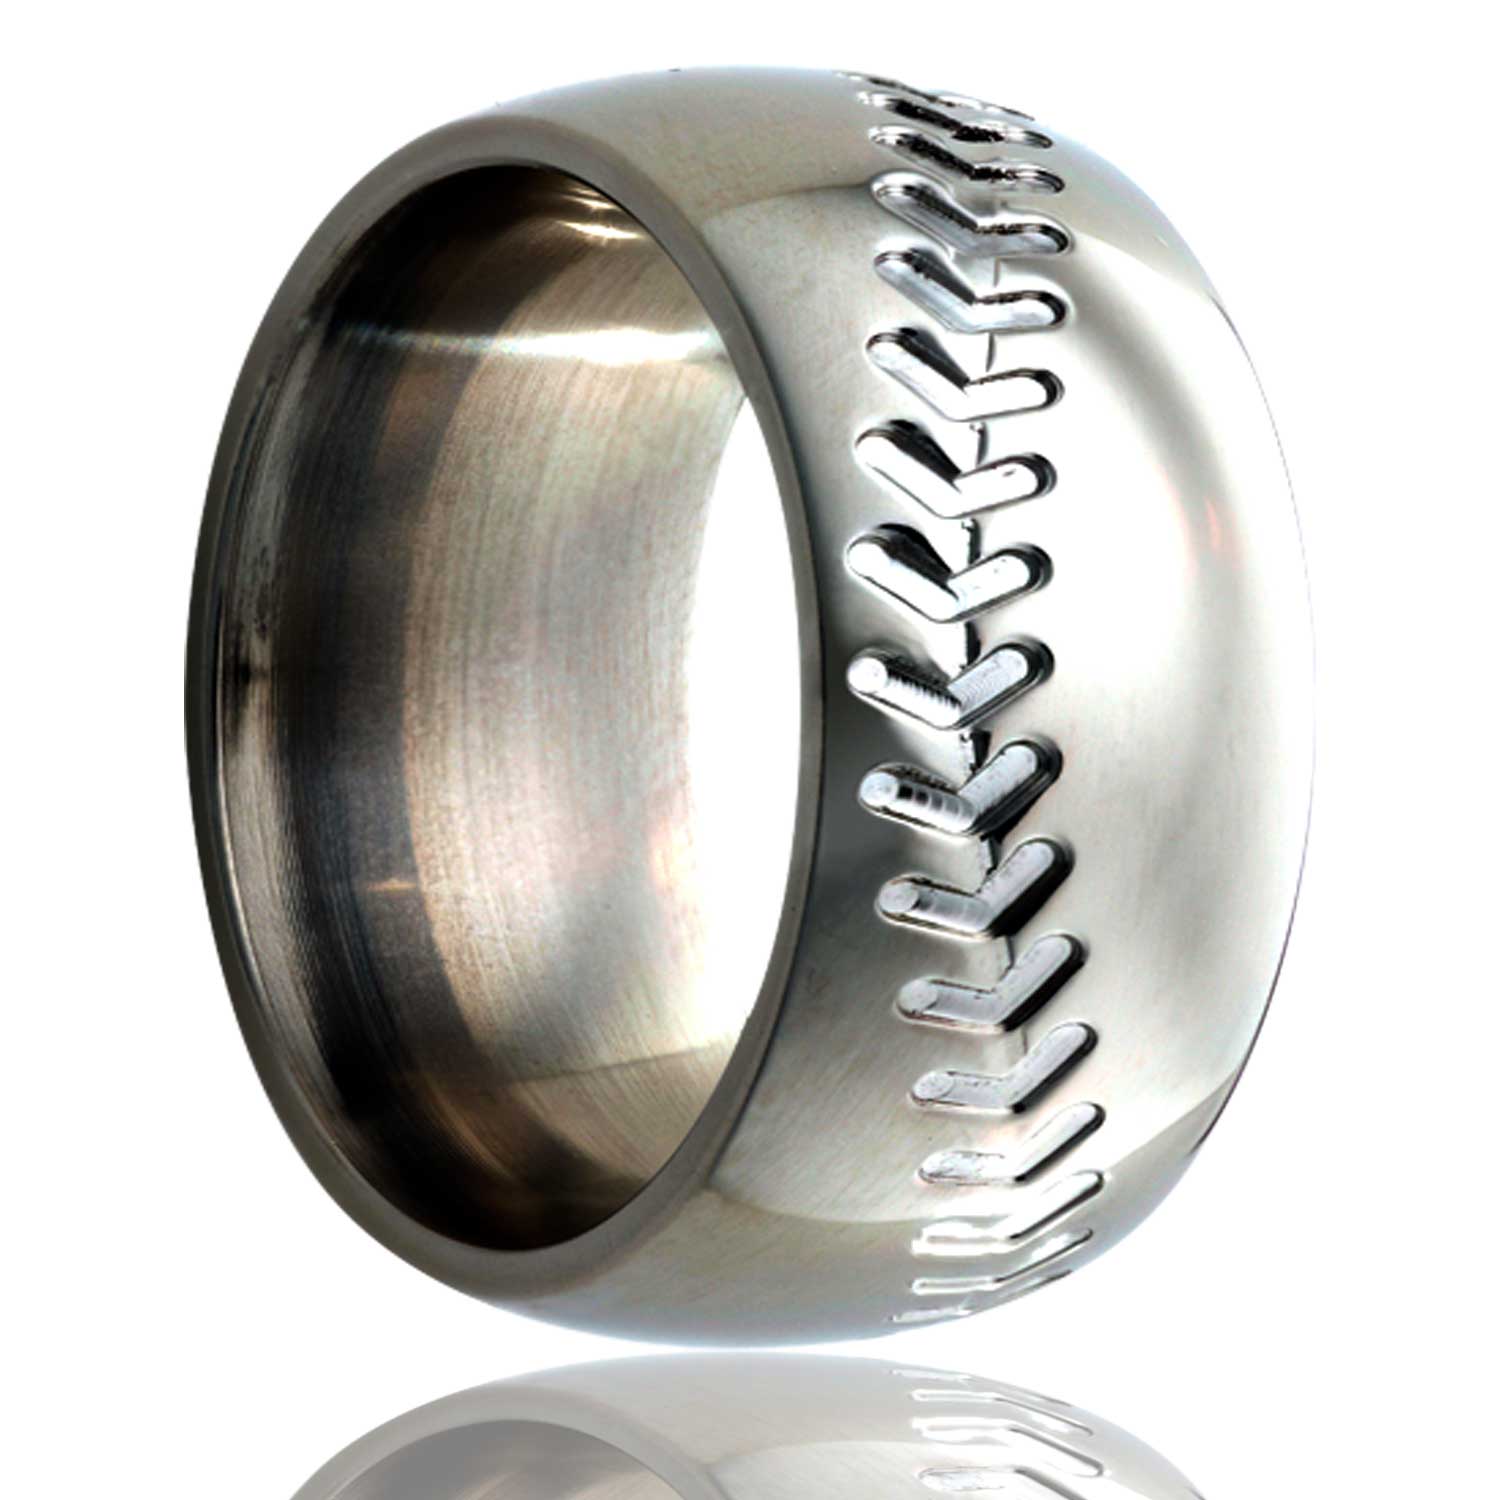 A baseball pattern domed titanium wedding band displayed on a neutral white background.